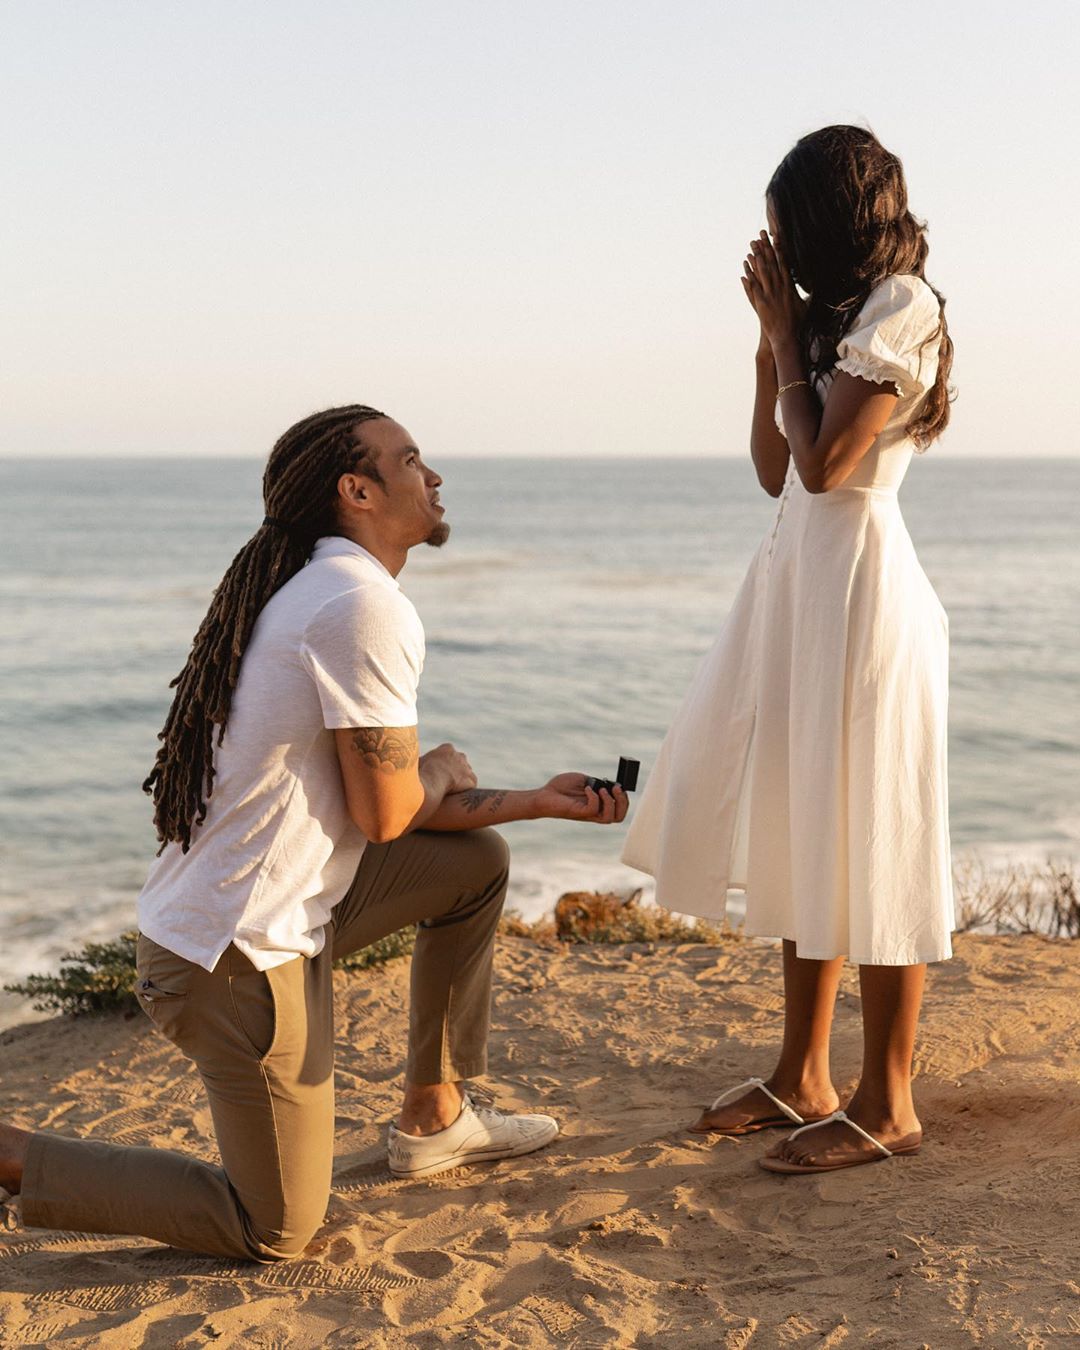 Are You the One? Stars Uche and Clinton Love Story and Seaside Proposal